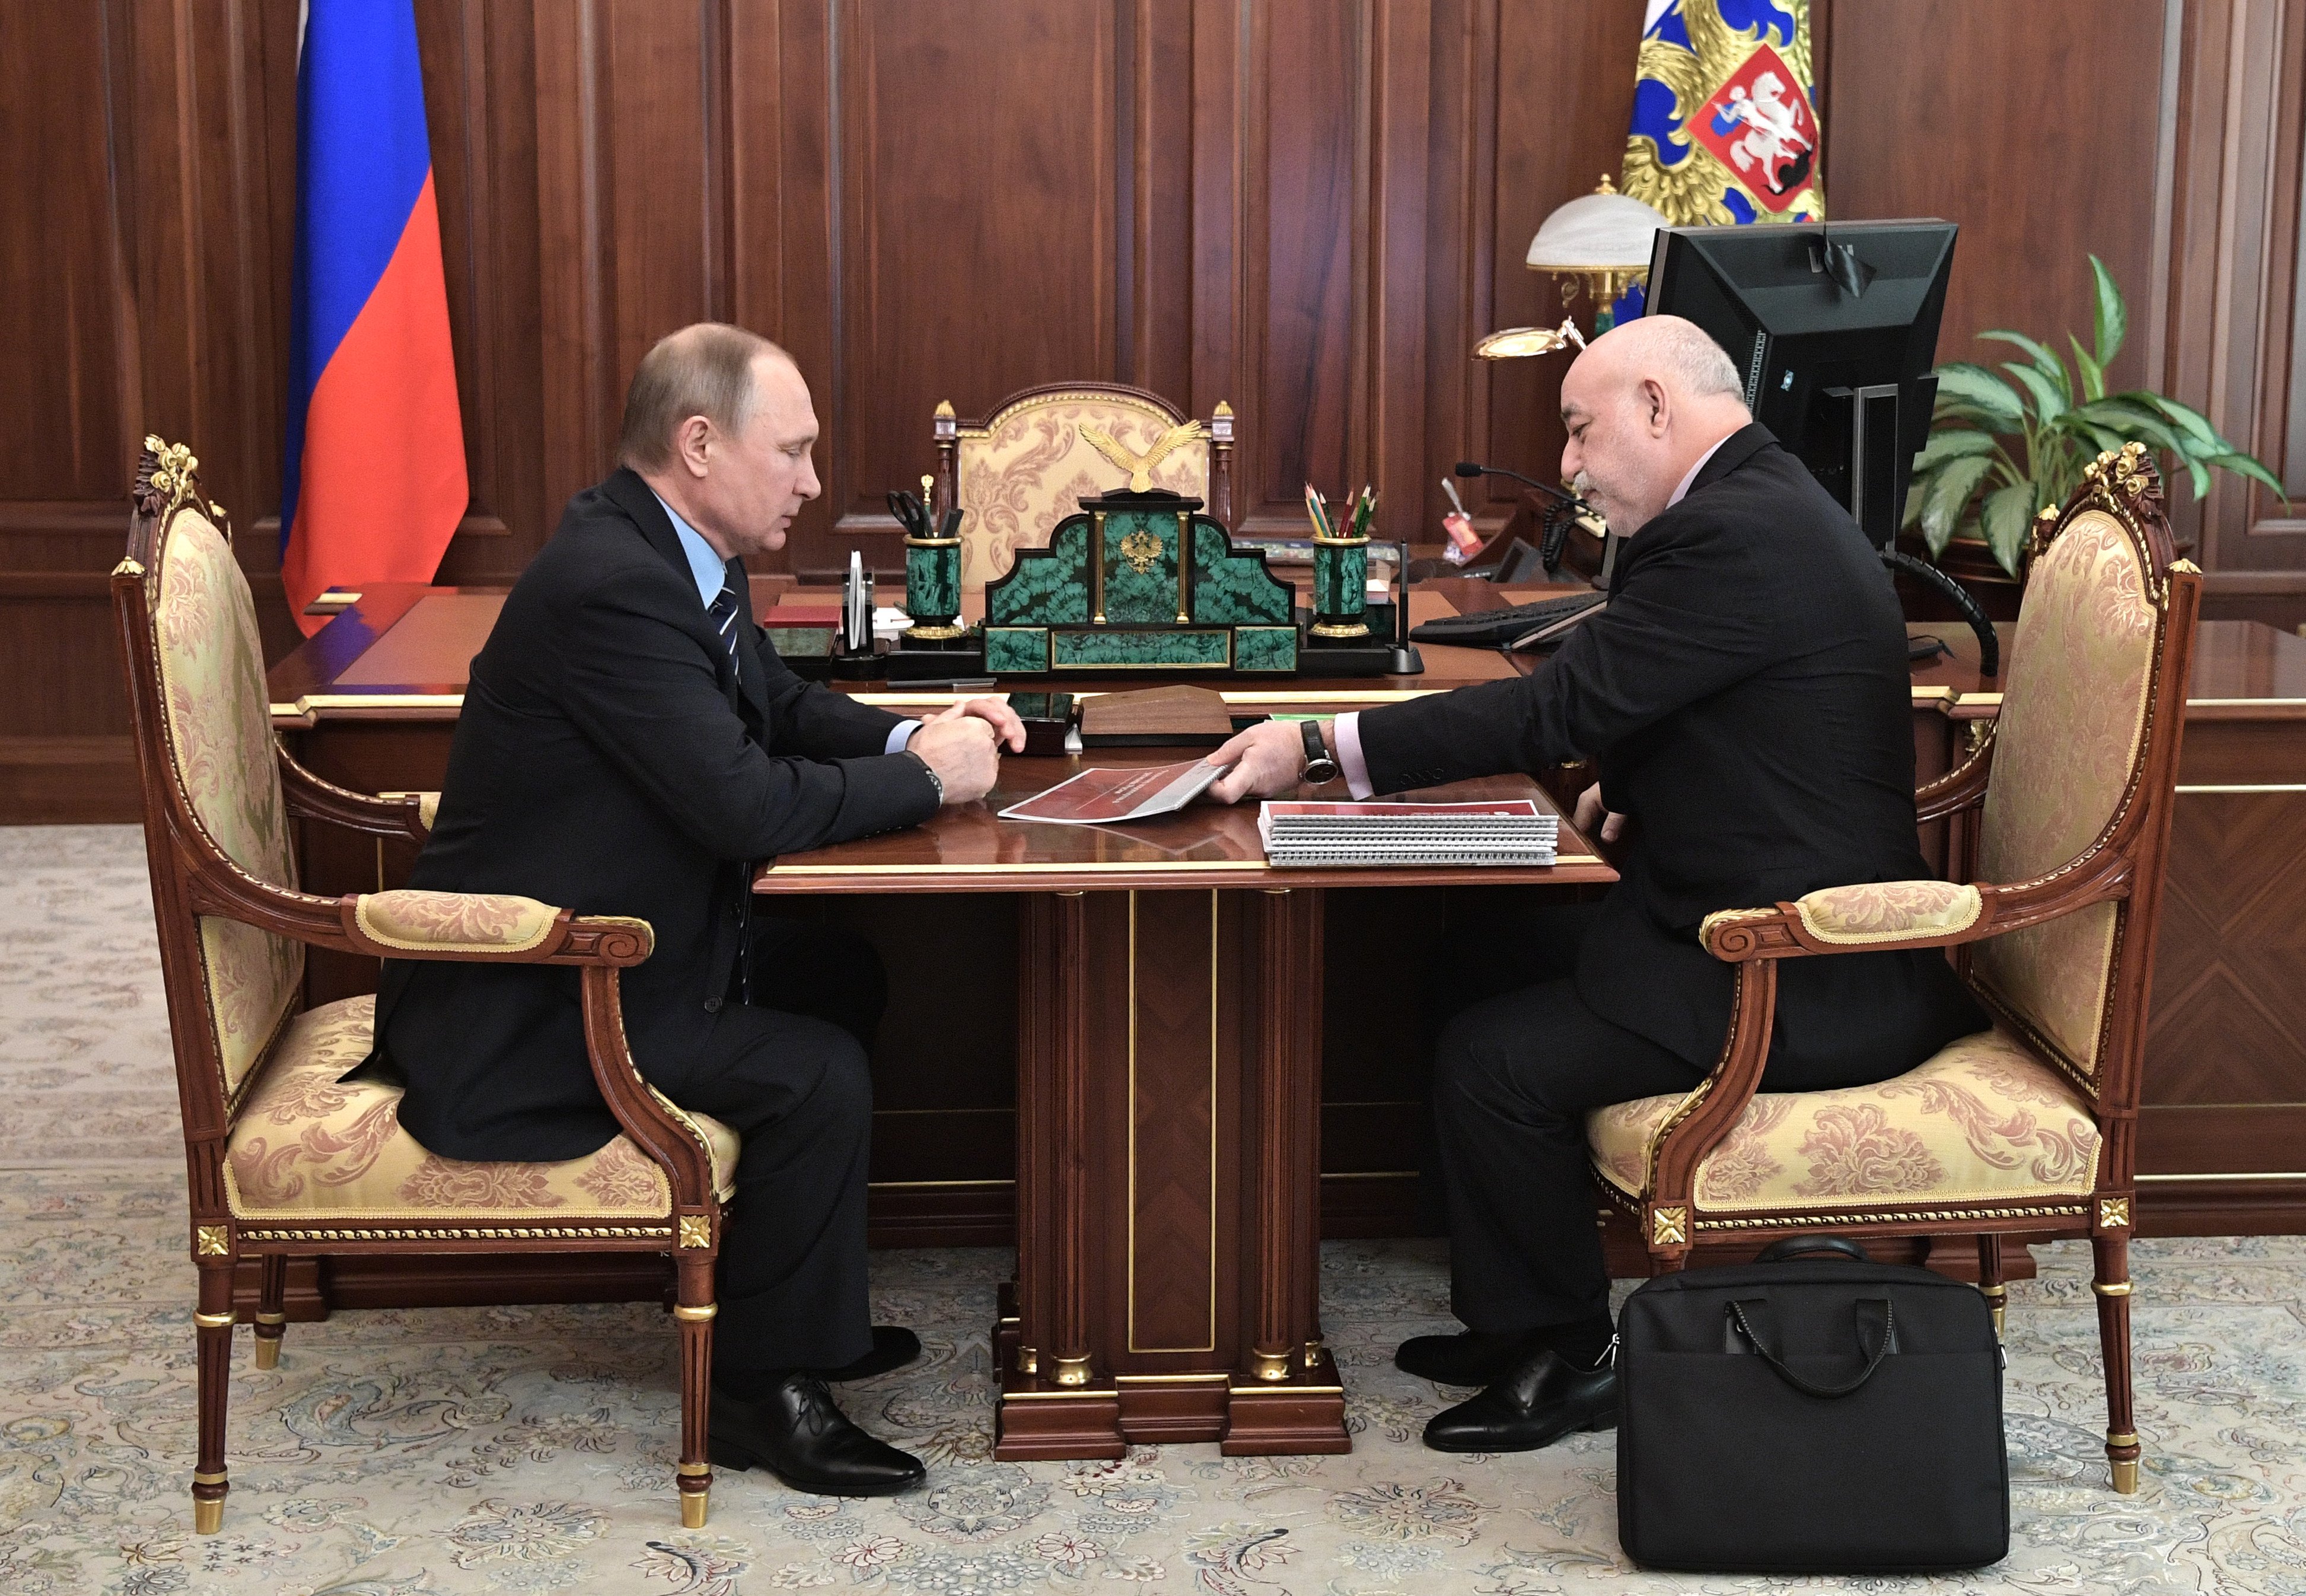 President of Russia on Twitter: "Meeting with Renova head Viktor Vekselberg:  innovative projects, airport construction in Rostov-on-Don  https://t.co/8jVqrn9XUB https://t.co/KT5zh2oWbl" / Twitter